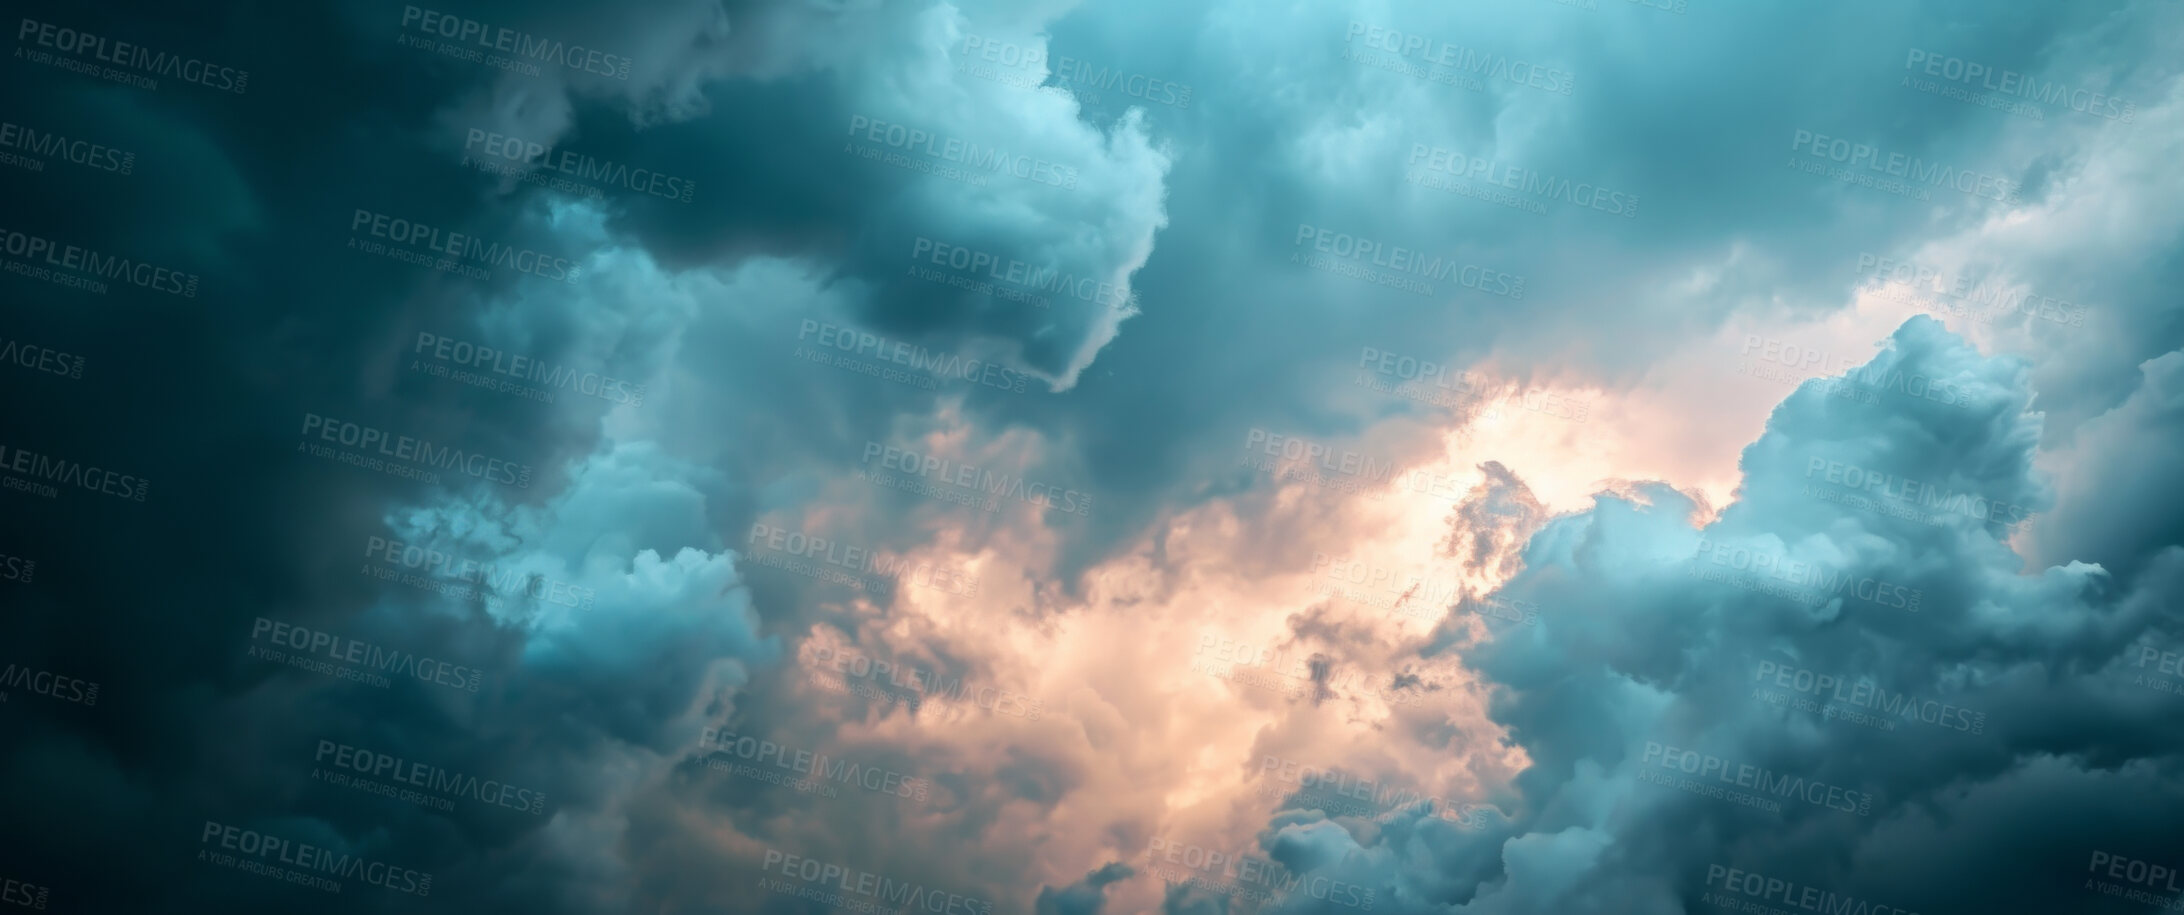 Buy stock photo Abstract, storm clouds and outdoor climate change background for environment, weather danger and disaster. Dark sky, rain and hurricane backdrop mockup for poster, news report or wallpaper design